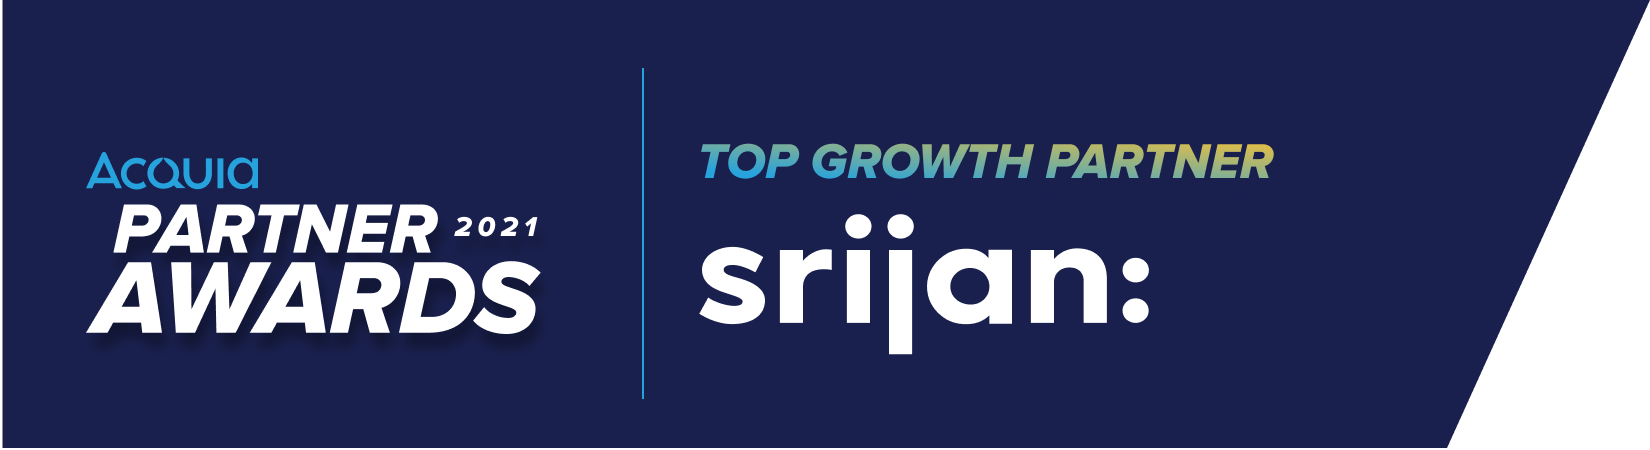 Srijan Named Winner of Acquia Top Growth Partner of the Year Award for 2021